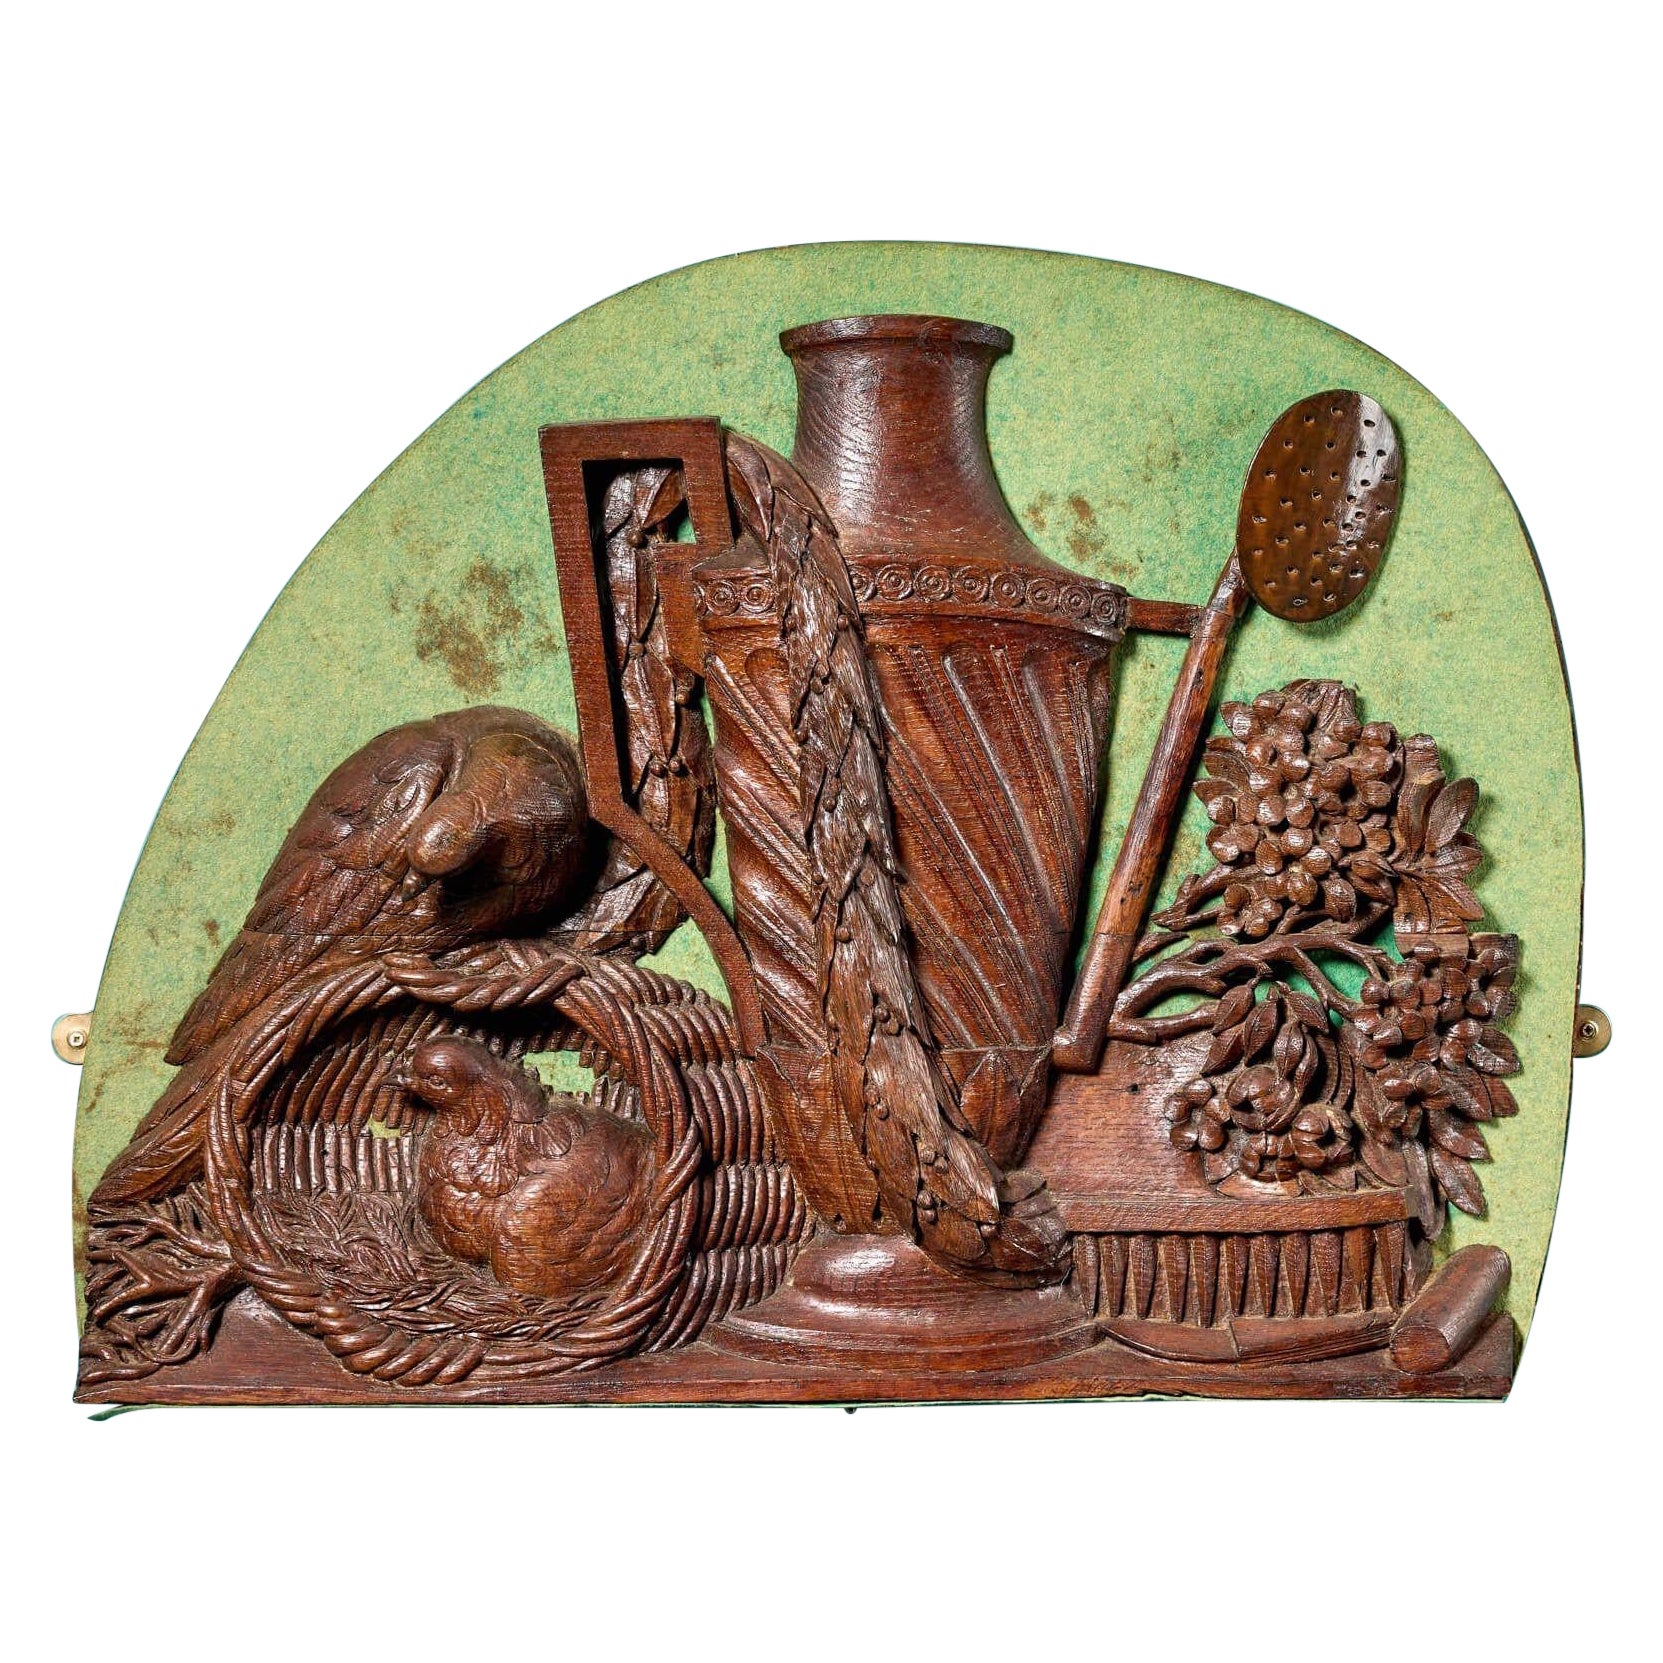 Antique Carved Oak Decorative Still Life Wall Panel For Sale